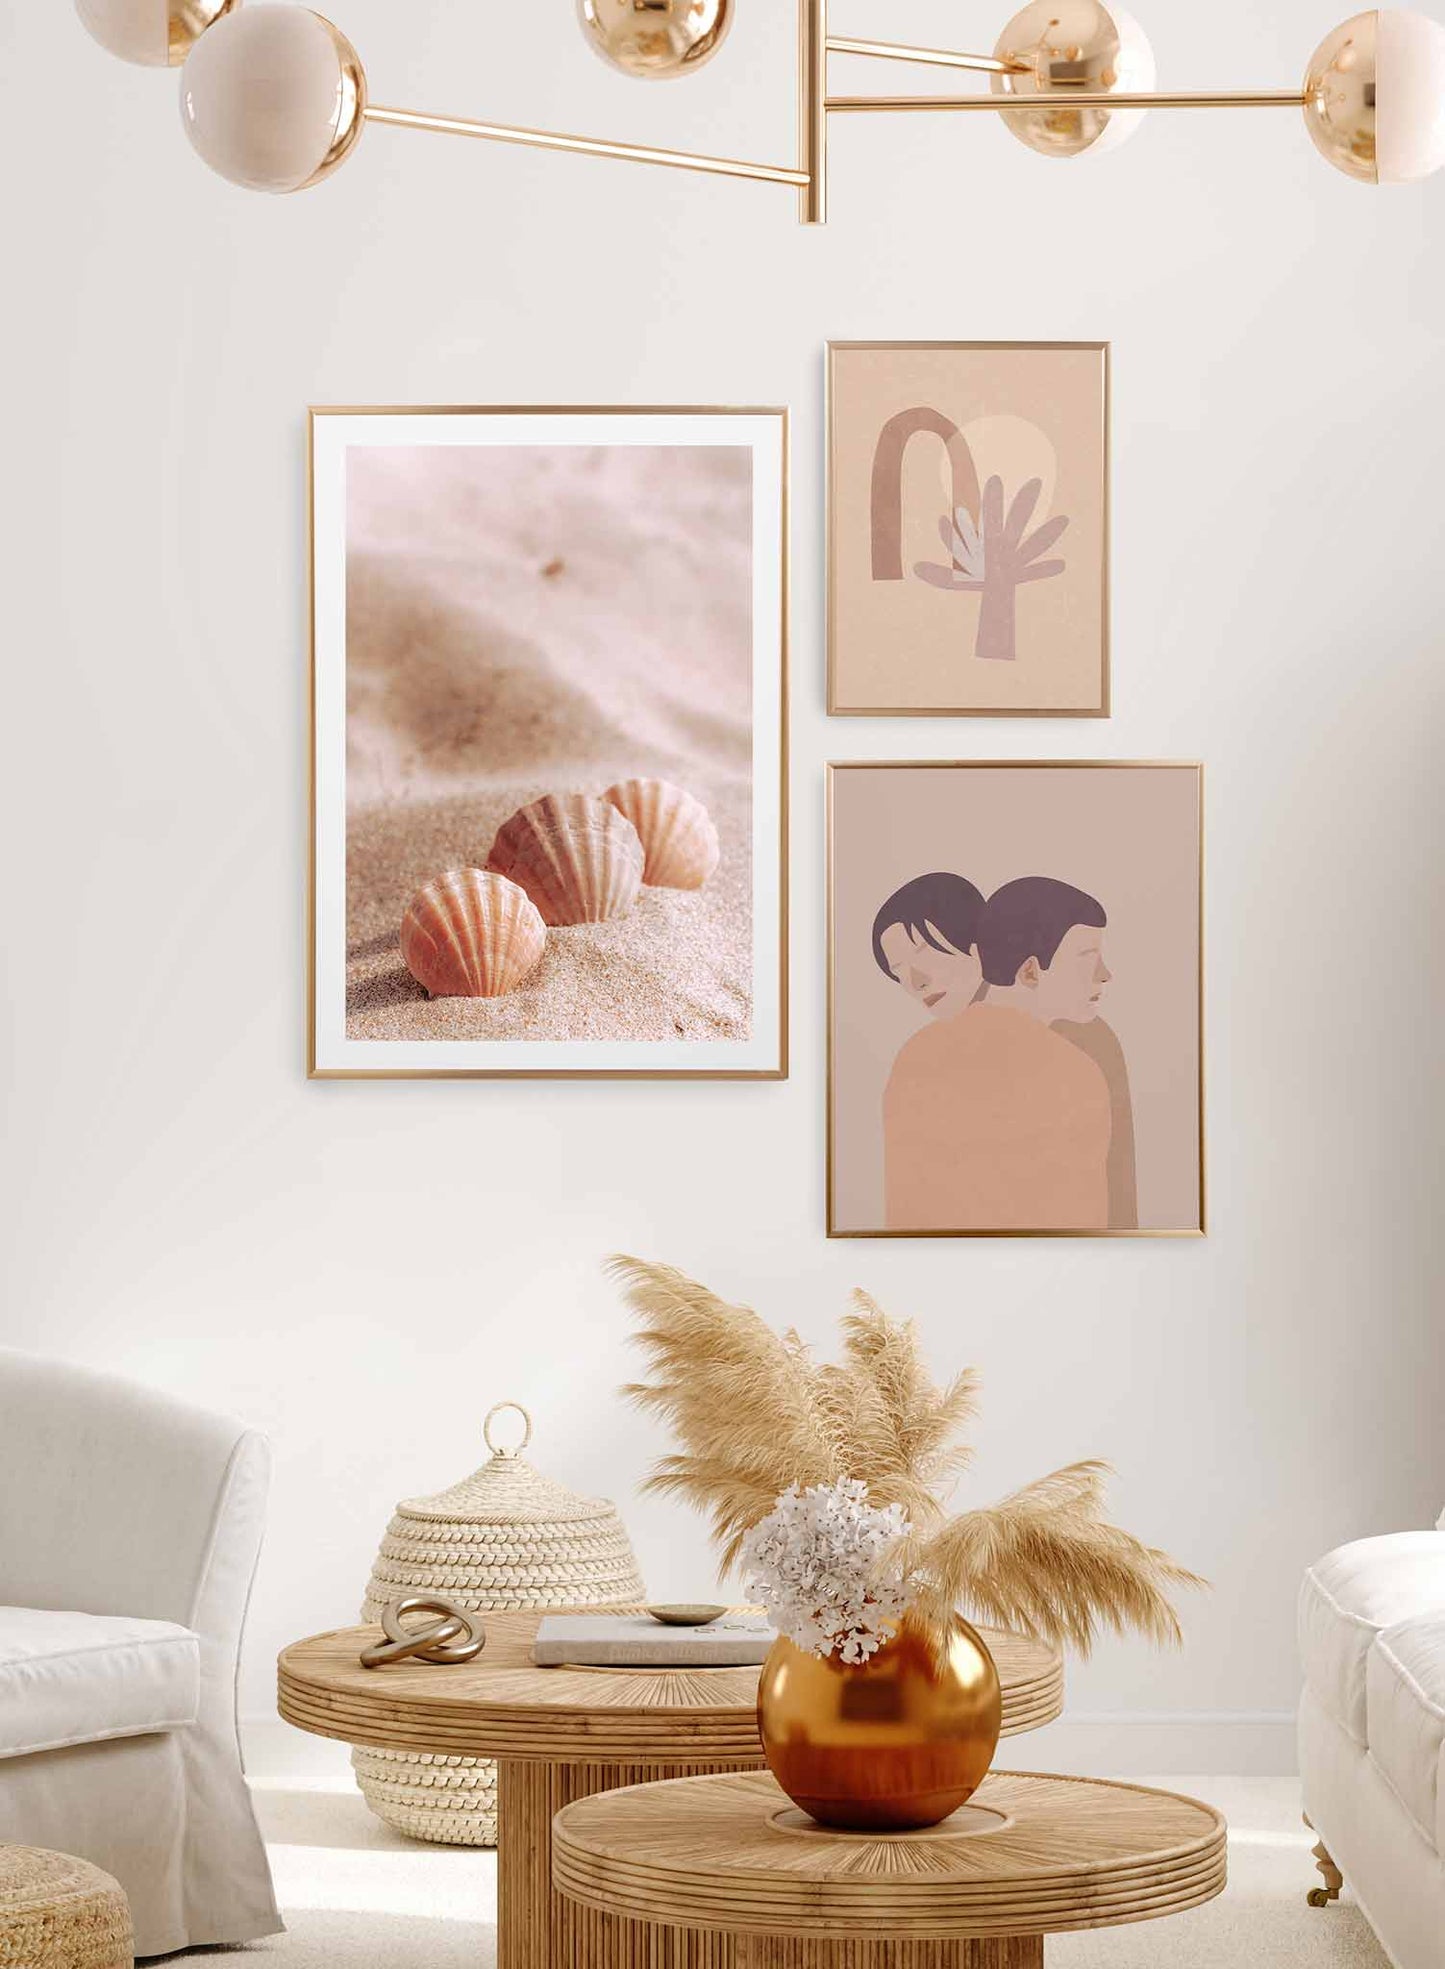 Sweet Seashells is a minimalist photography of three small pink clams on soft beige-pink sand by Opposite Wall.